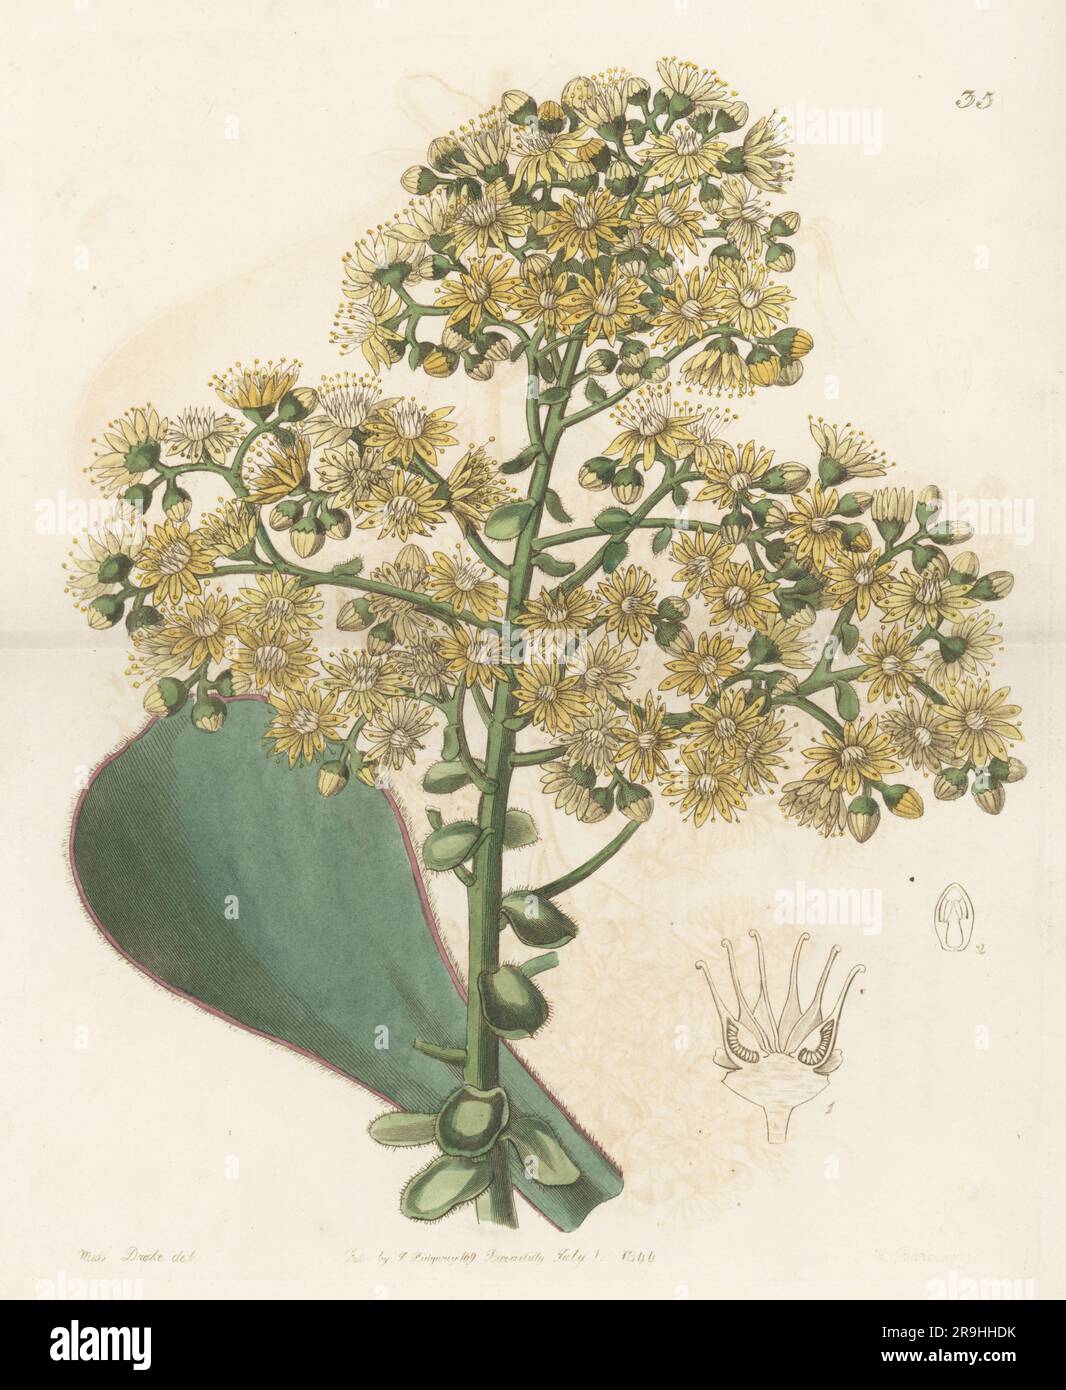 Aeonium undulatum. Succulent, evergreen flowering plant found by Barker Webb in Gran Canaria in the Canary Islands and flowered at William Young's nursery in Milford. Mr Young's houseleek, Aeonium youngianum. Handcoloured copperplate engraving by George Barclay after a botanical illustration by Sarah Drake from Edwards’ Botanical Register, continued by John Lindley, published by James Ridgway, London, 1844. Stock Photo